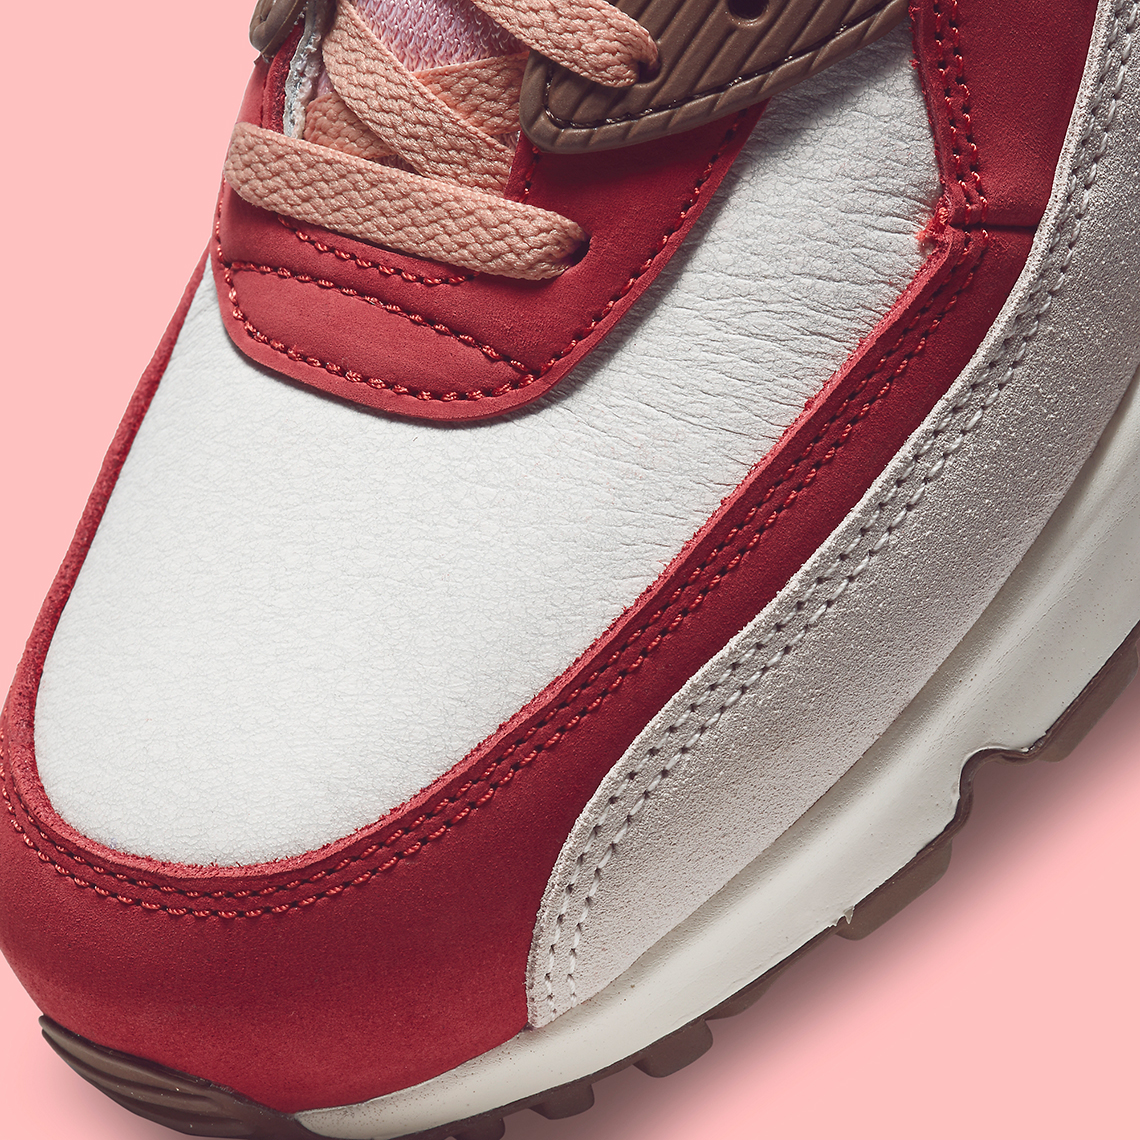 Nike Air Max 90 Bacon Cu1816 100 Official Images 6